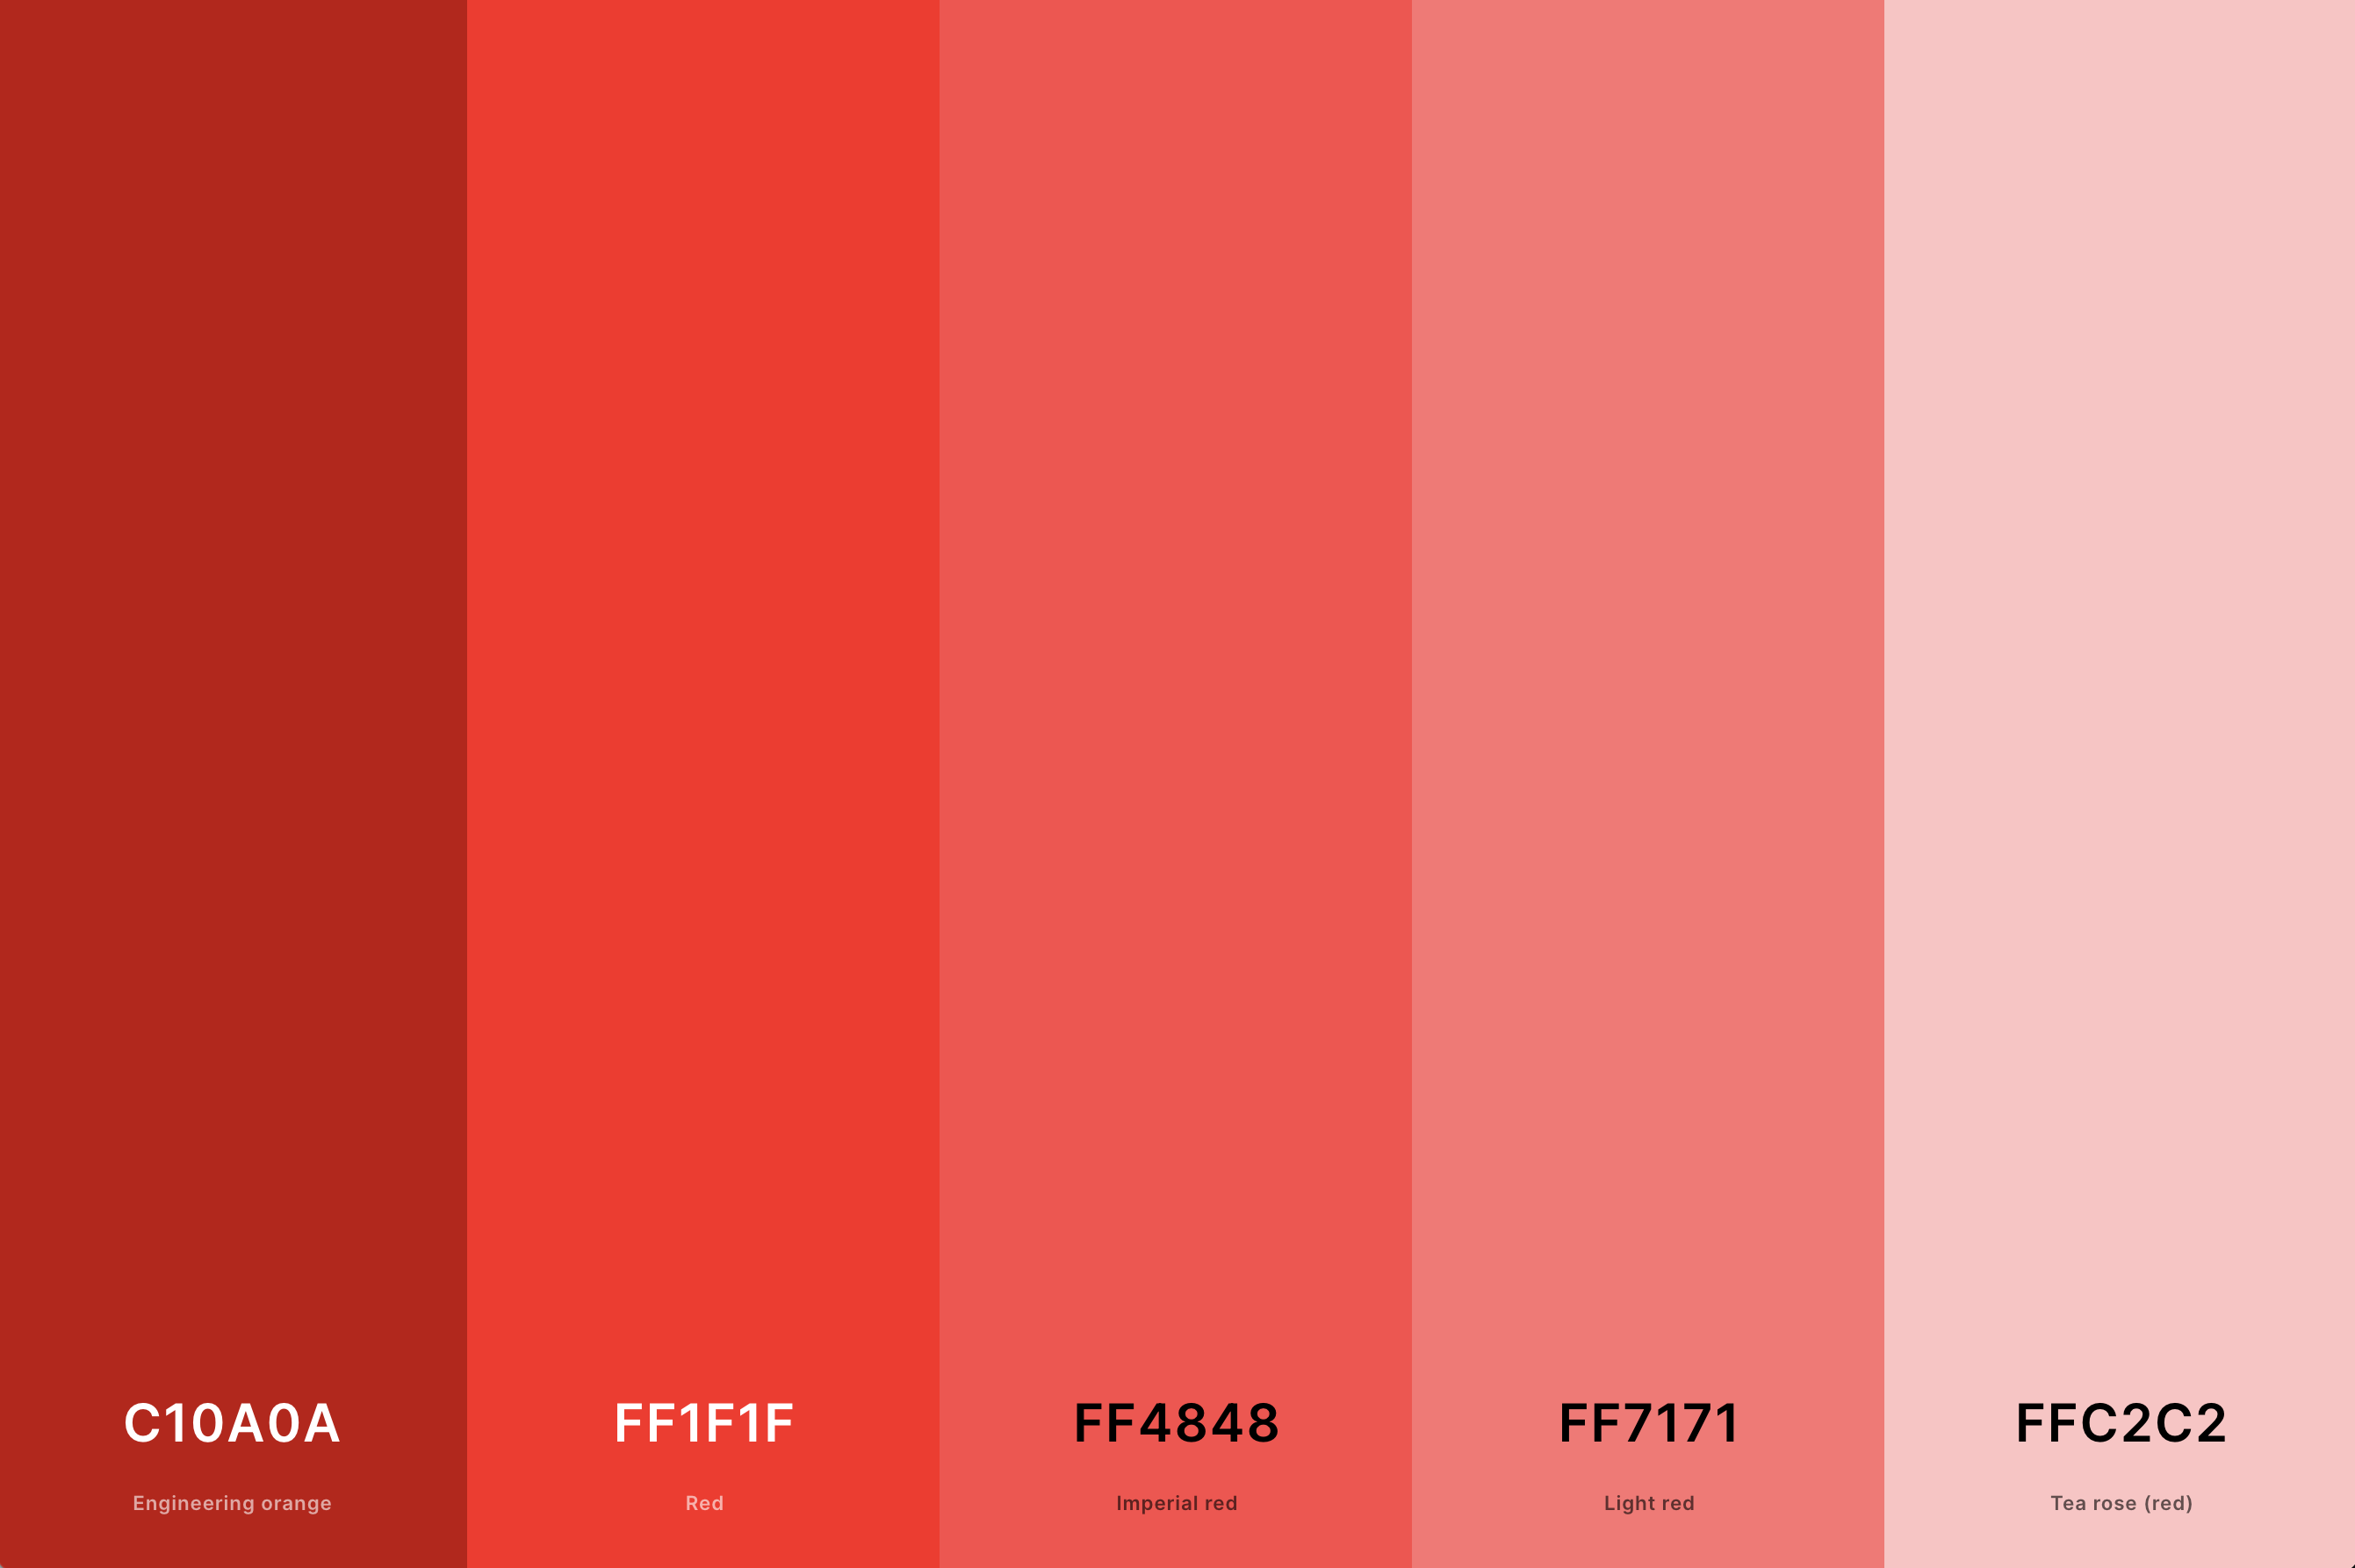 15. Shades Of Red Color Palette Color Palette with Engineering Orange (Hex #C10A0A) + Red (Hex #FF1F1F) + Imperial Red (Hex #FF4848) + Light Red (Hex #FF7171) + Tea Rose (Red) (Hex #FFC2C2) Color Palette with Hex Codes